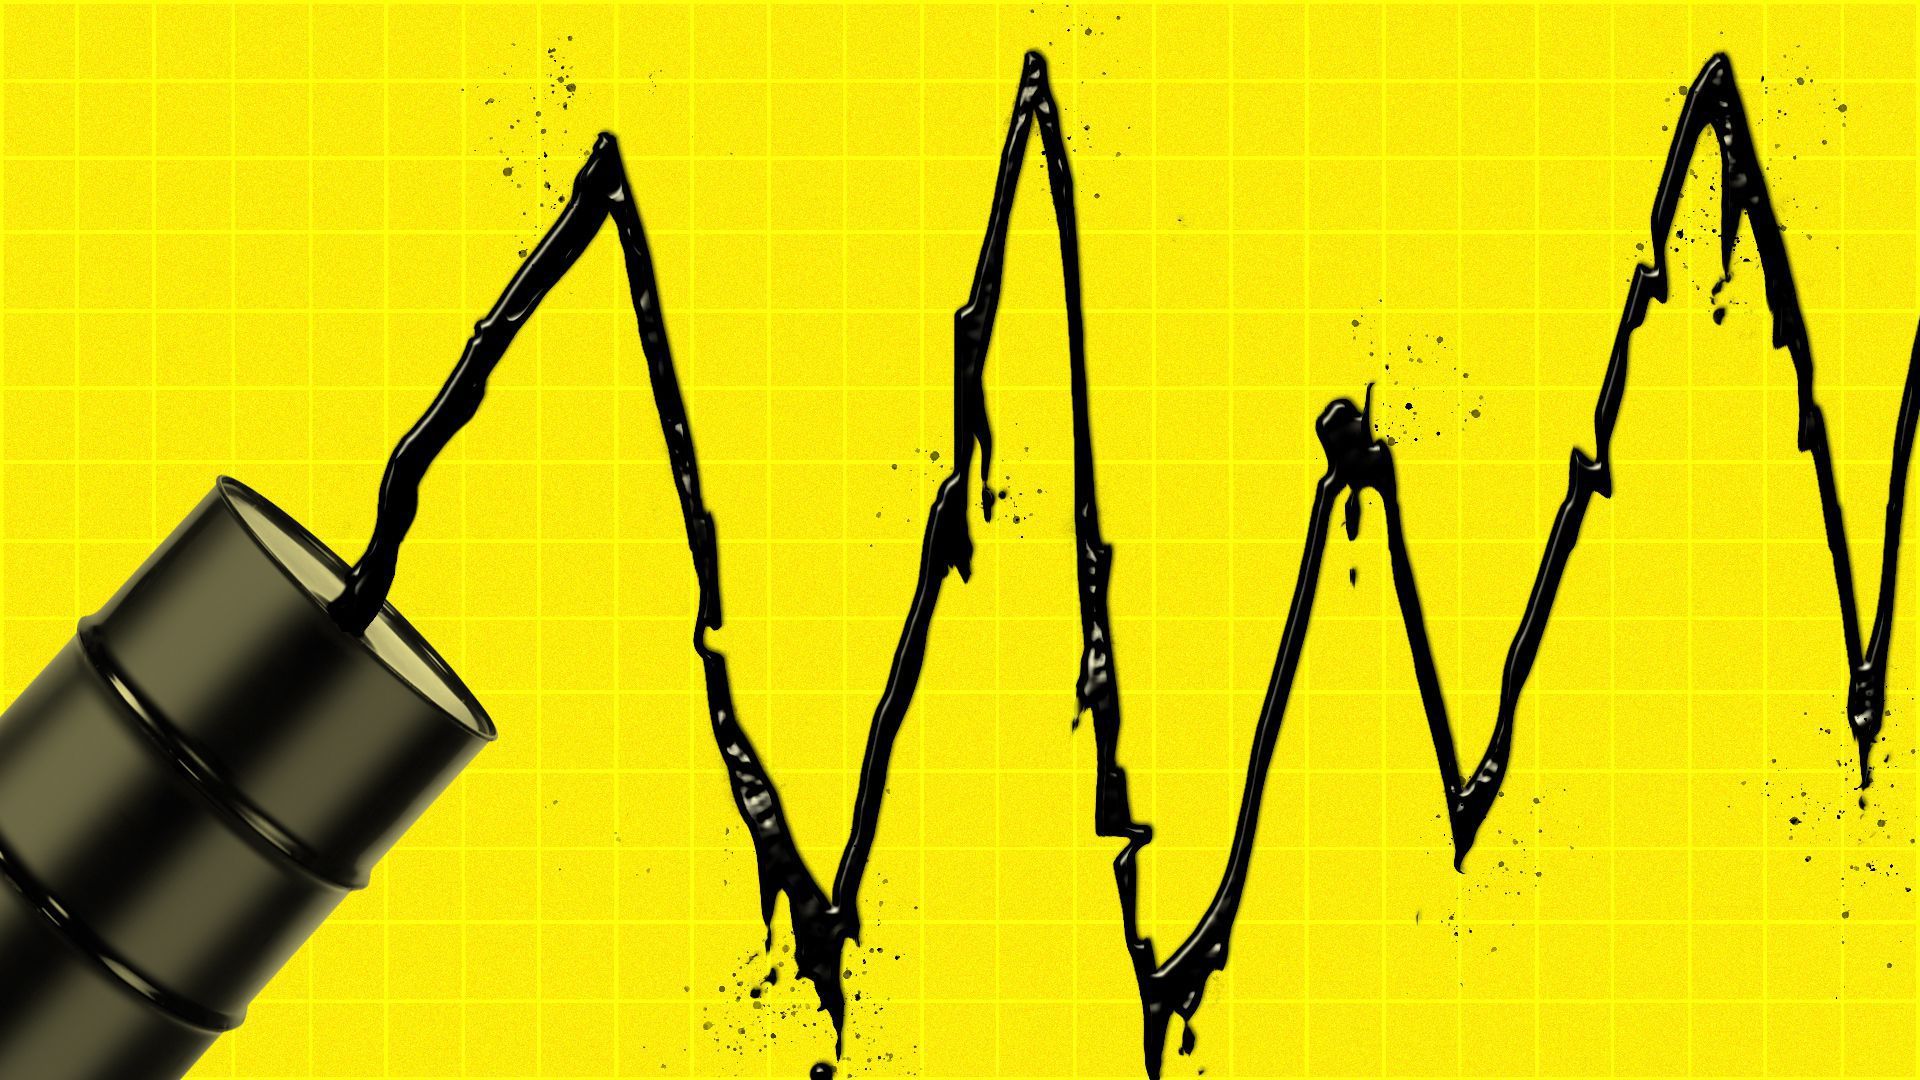 Illustration of an oil can spouting oil into a line chart shape